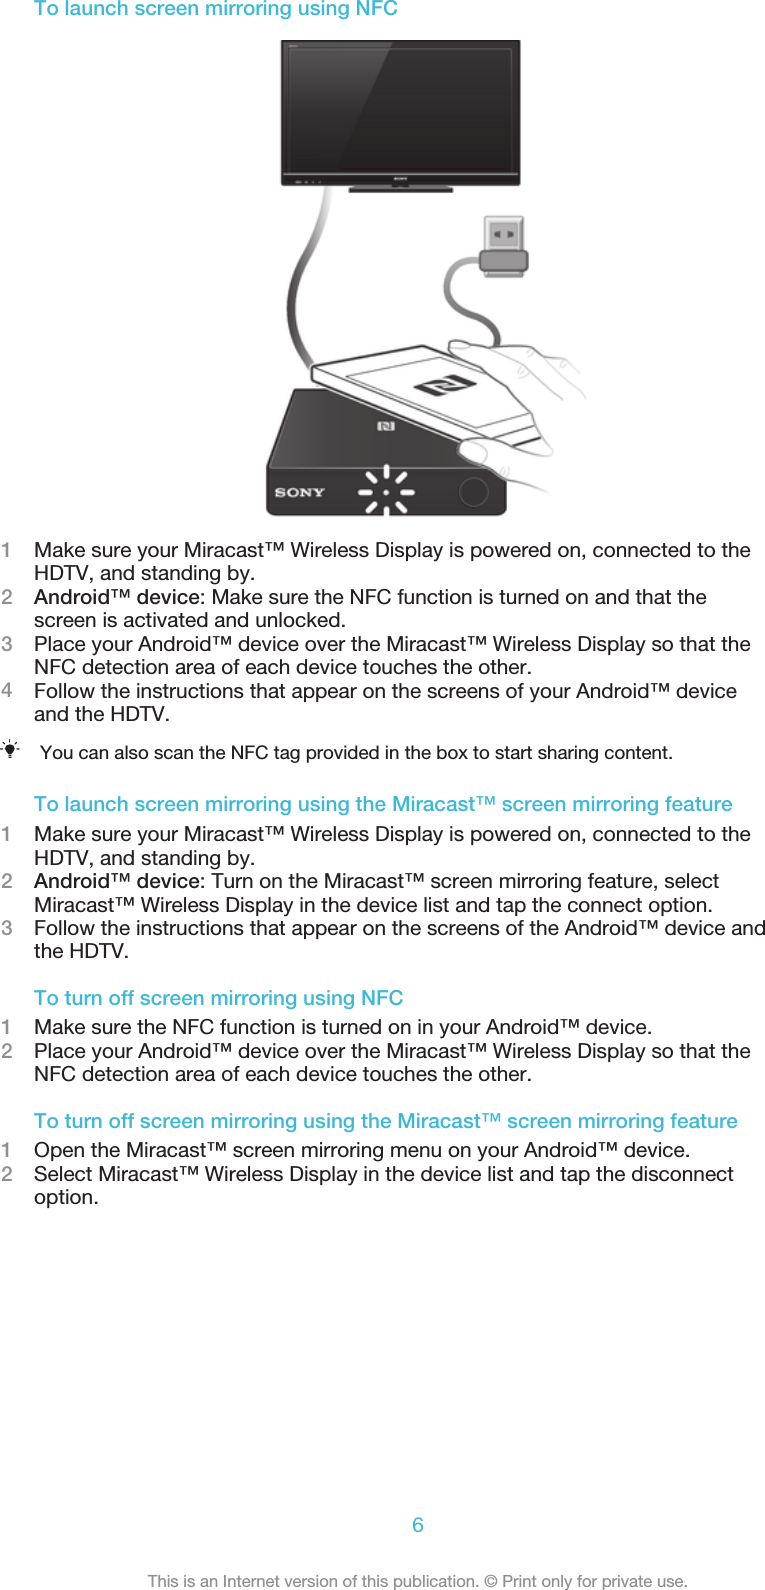 To launch screen mirroring using NFC1Make sure your Miracast™ Wireless Display is powered on, connected to theHDTV, and standing by.2Android™ device: Make sure the NFC function is turned on and that thescreen is activated and unlocked.3Place your Android™ device over the Miracast™ Wireless Display so that theNFC detection area of each device touches the other.4Follow the instructions that appear on the screens of your Android™ deviceand the HDTV.You can also scan the NFC tag provided in the box to start sharing content.To launch screen mirroring using the Miracast™ screen mirroring feature1Make sure your Miracast™ Wireless Display is powered on, connected to theHDTV, and standing by.2Android™ device: Turn on the Miracast™ screen mirroring feature, selectMiracast™ Wireless Display in the device list and tap the connect option.3Follow the instructions that appear on the screens of the Android™ device andthe HDTV.To turn off screen mirroring using NFC1Make sure the NFC function is turned on in your Android™ device.2Place your Android™ device over the Miracast™ Wireless Display so that theNFC detection area of each device touches the other.To turn off screen mirroring using the Miracast™ screen mirroring feature1Open the Miracast™ screen mirroring menu on your Android™ device.2Select Miracast™ Wireless Display in the device list and tap the disconnectoption.6This is an Internet version of this publication. © Print only for private use.